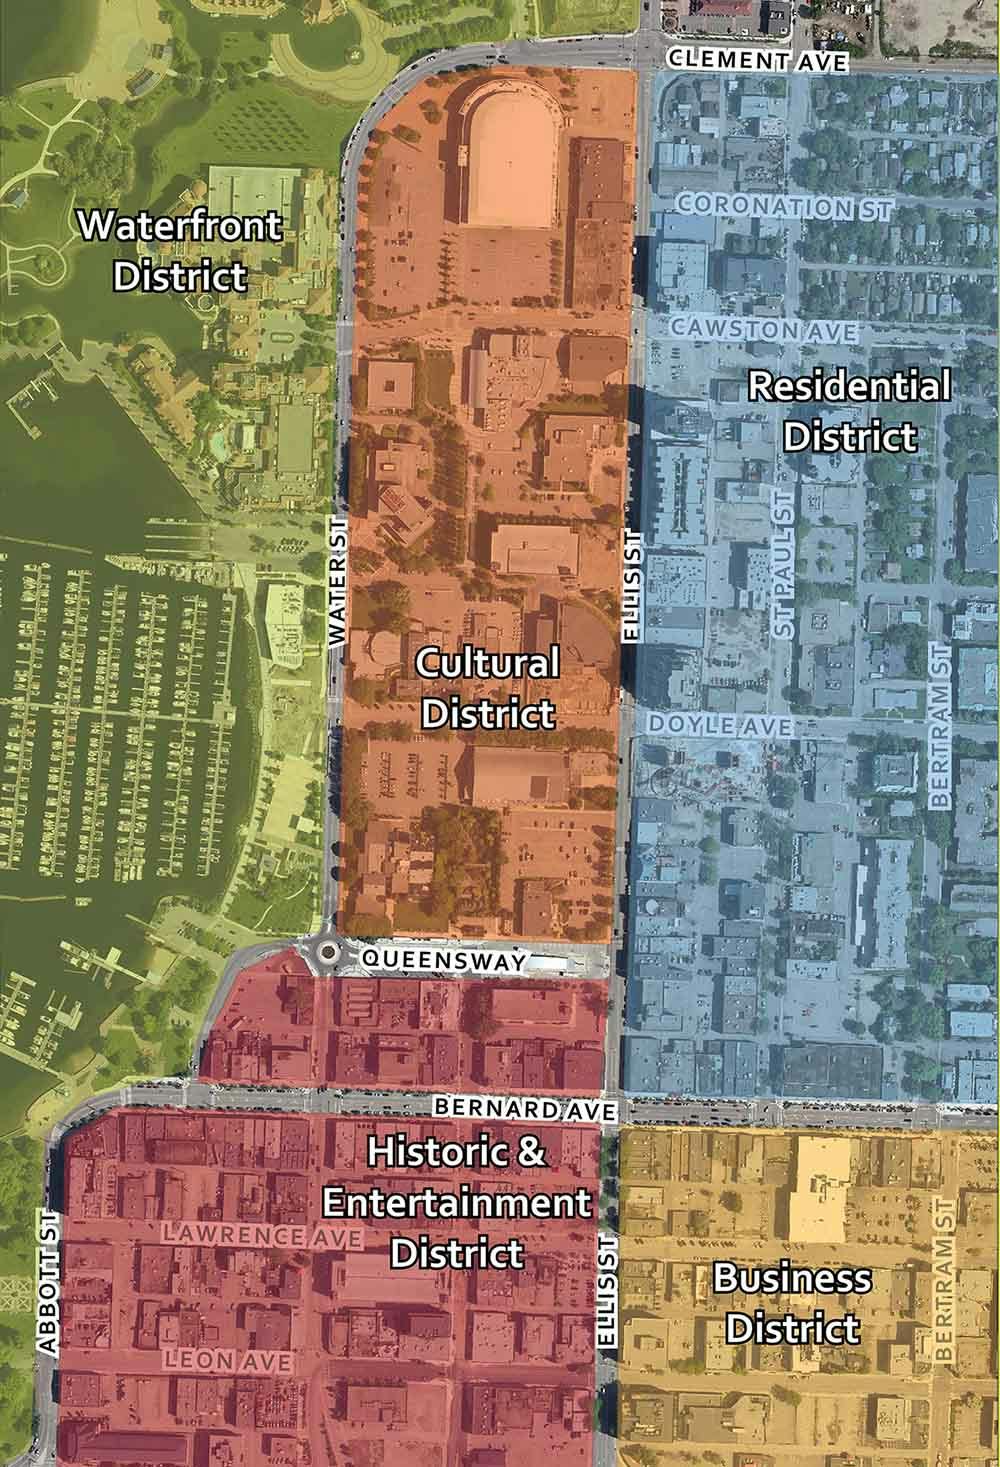 The districts of downtown Kelowna